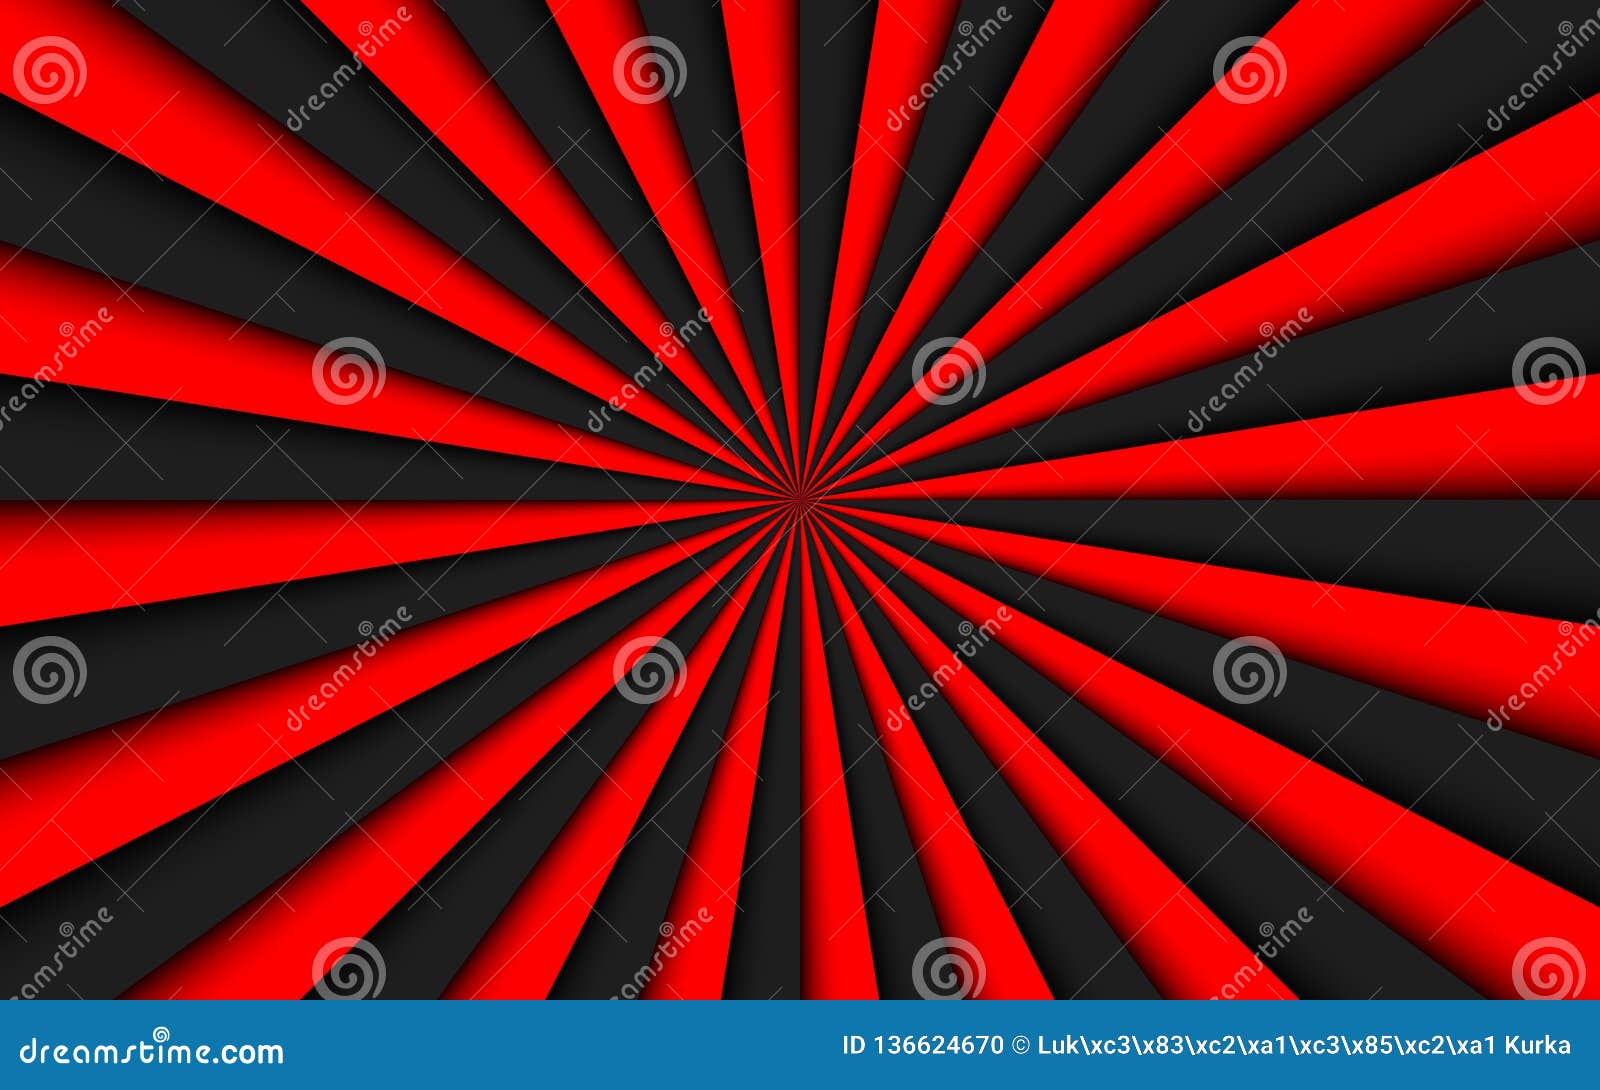 Black and Red Abstract Background, Black and Red Lines, Bright Pattern  Stock Vector - Illustration of antique, announcement: 136624670